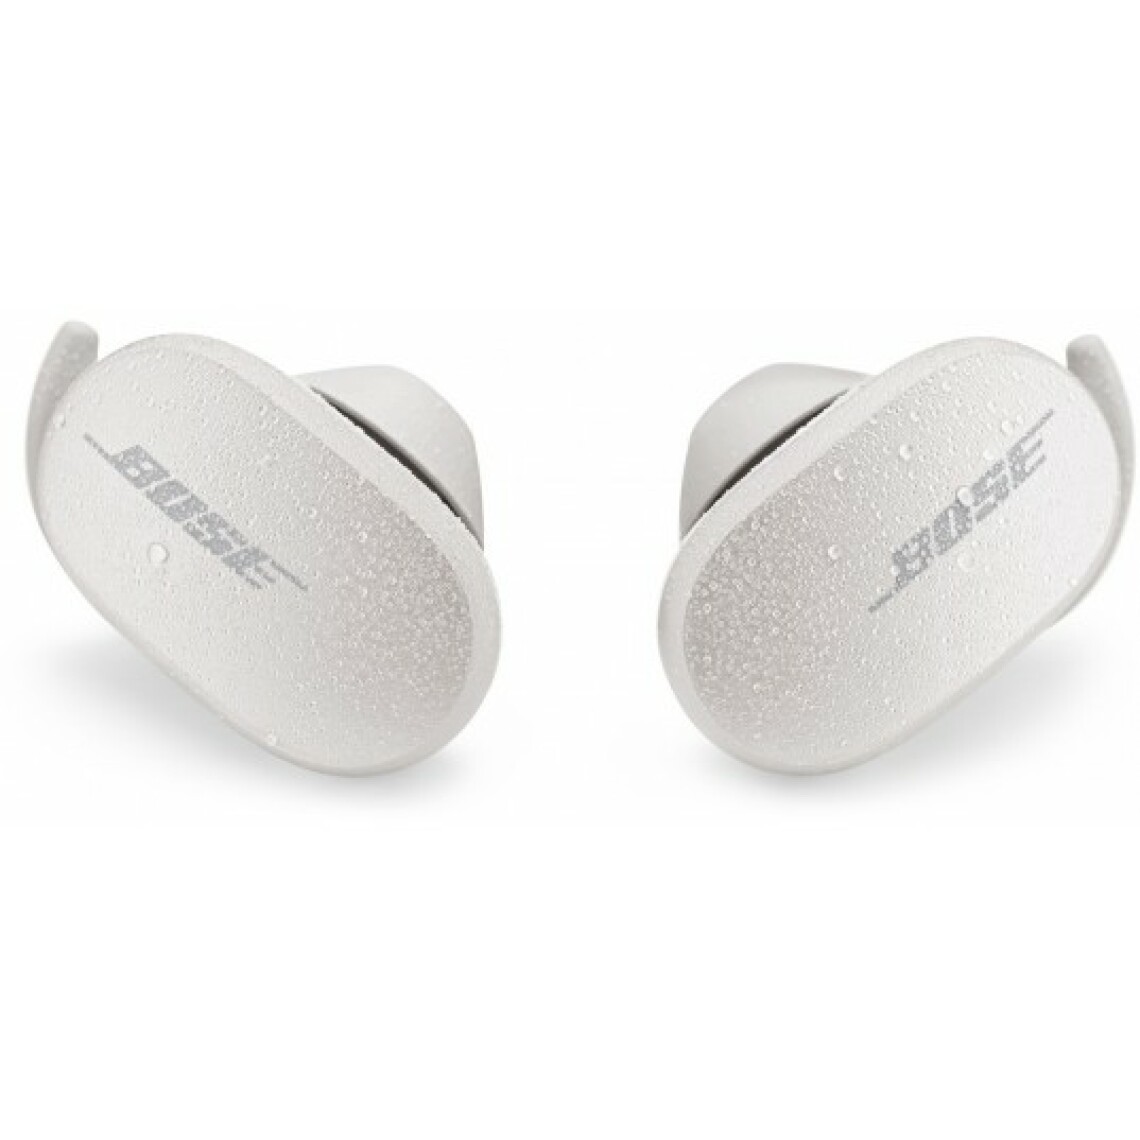 Bose - Ecouteurs True Wireless BOSE QUIETCOMFORT SOAPSTONE - Ecouteurs intra-auriculaires